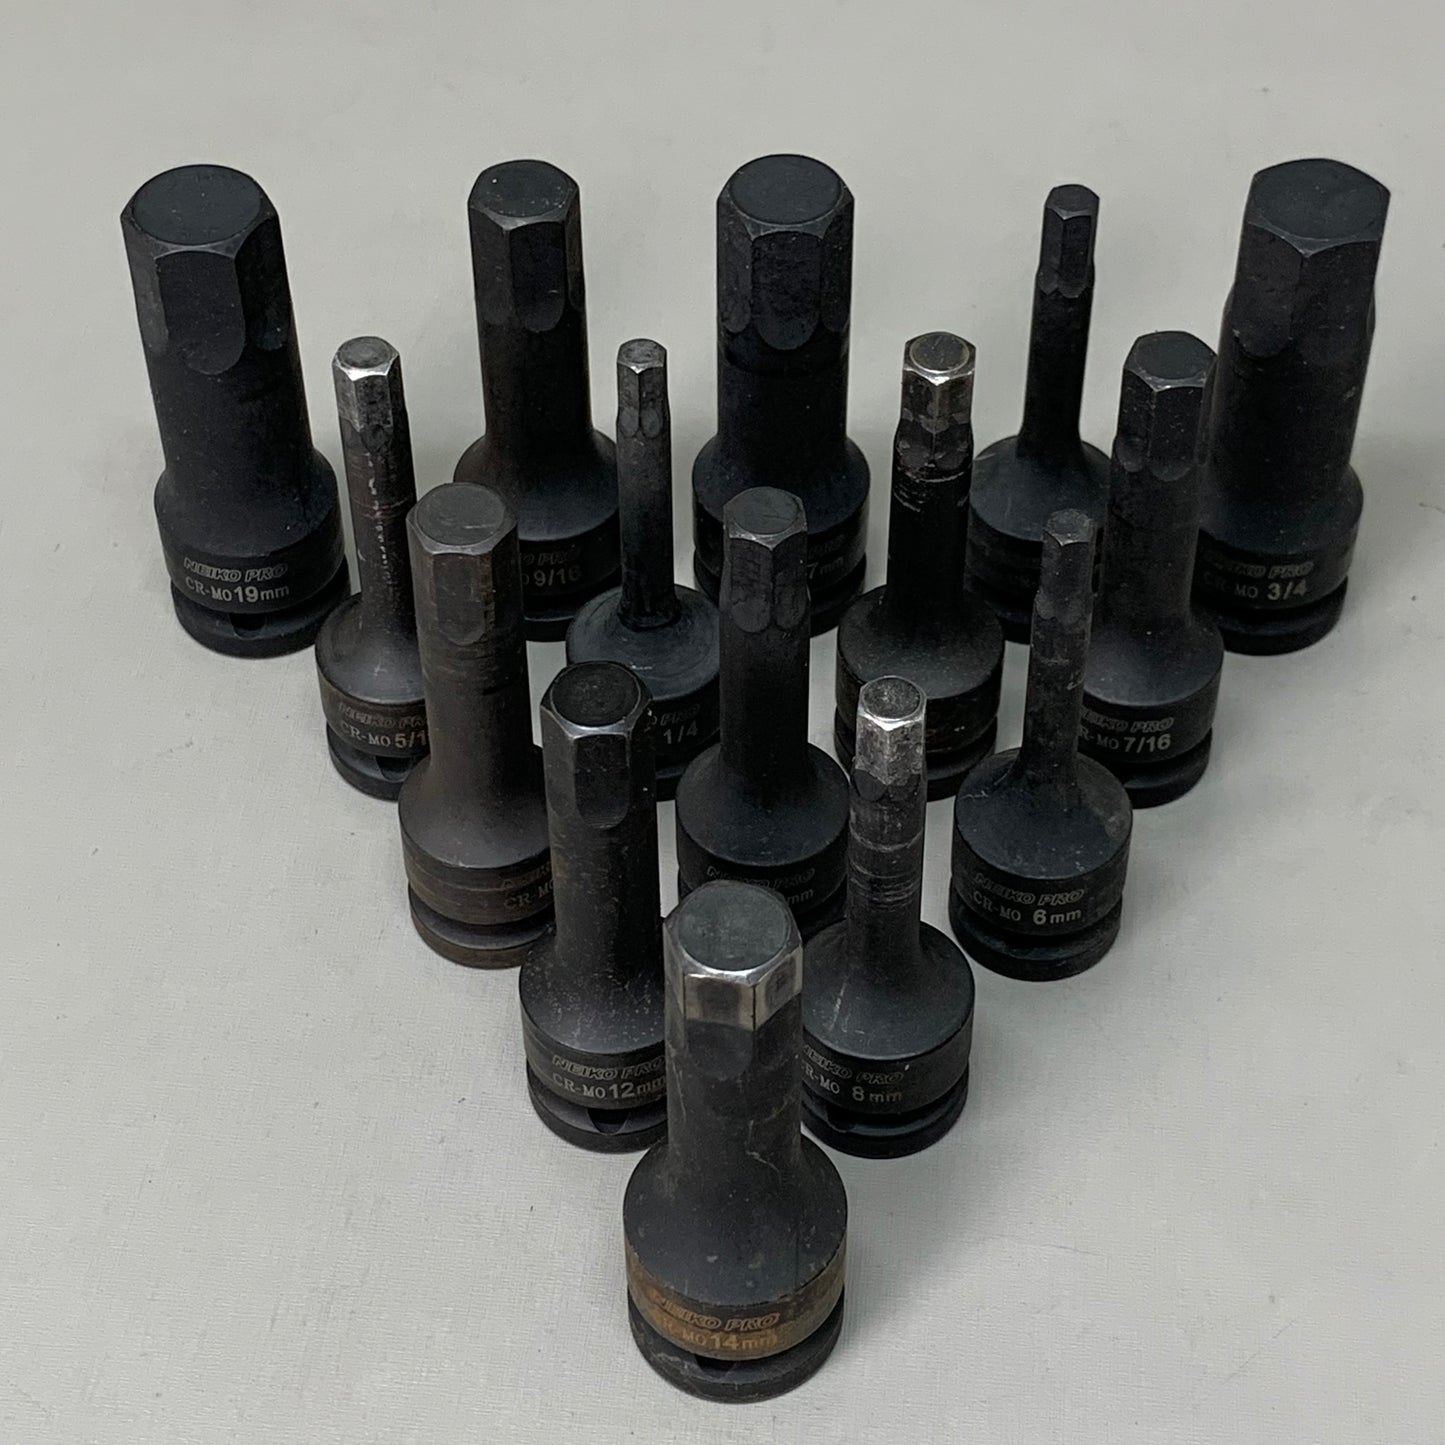 NEIKO 15 Piece SAE/Standard 1/2" Dr. Hex Impact Bit Set 1/4"-3/4" & 6MM-19MM (Pre-Owned)